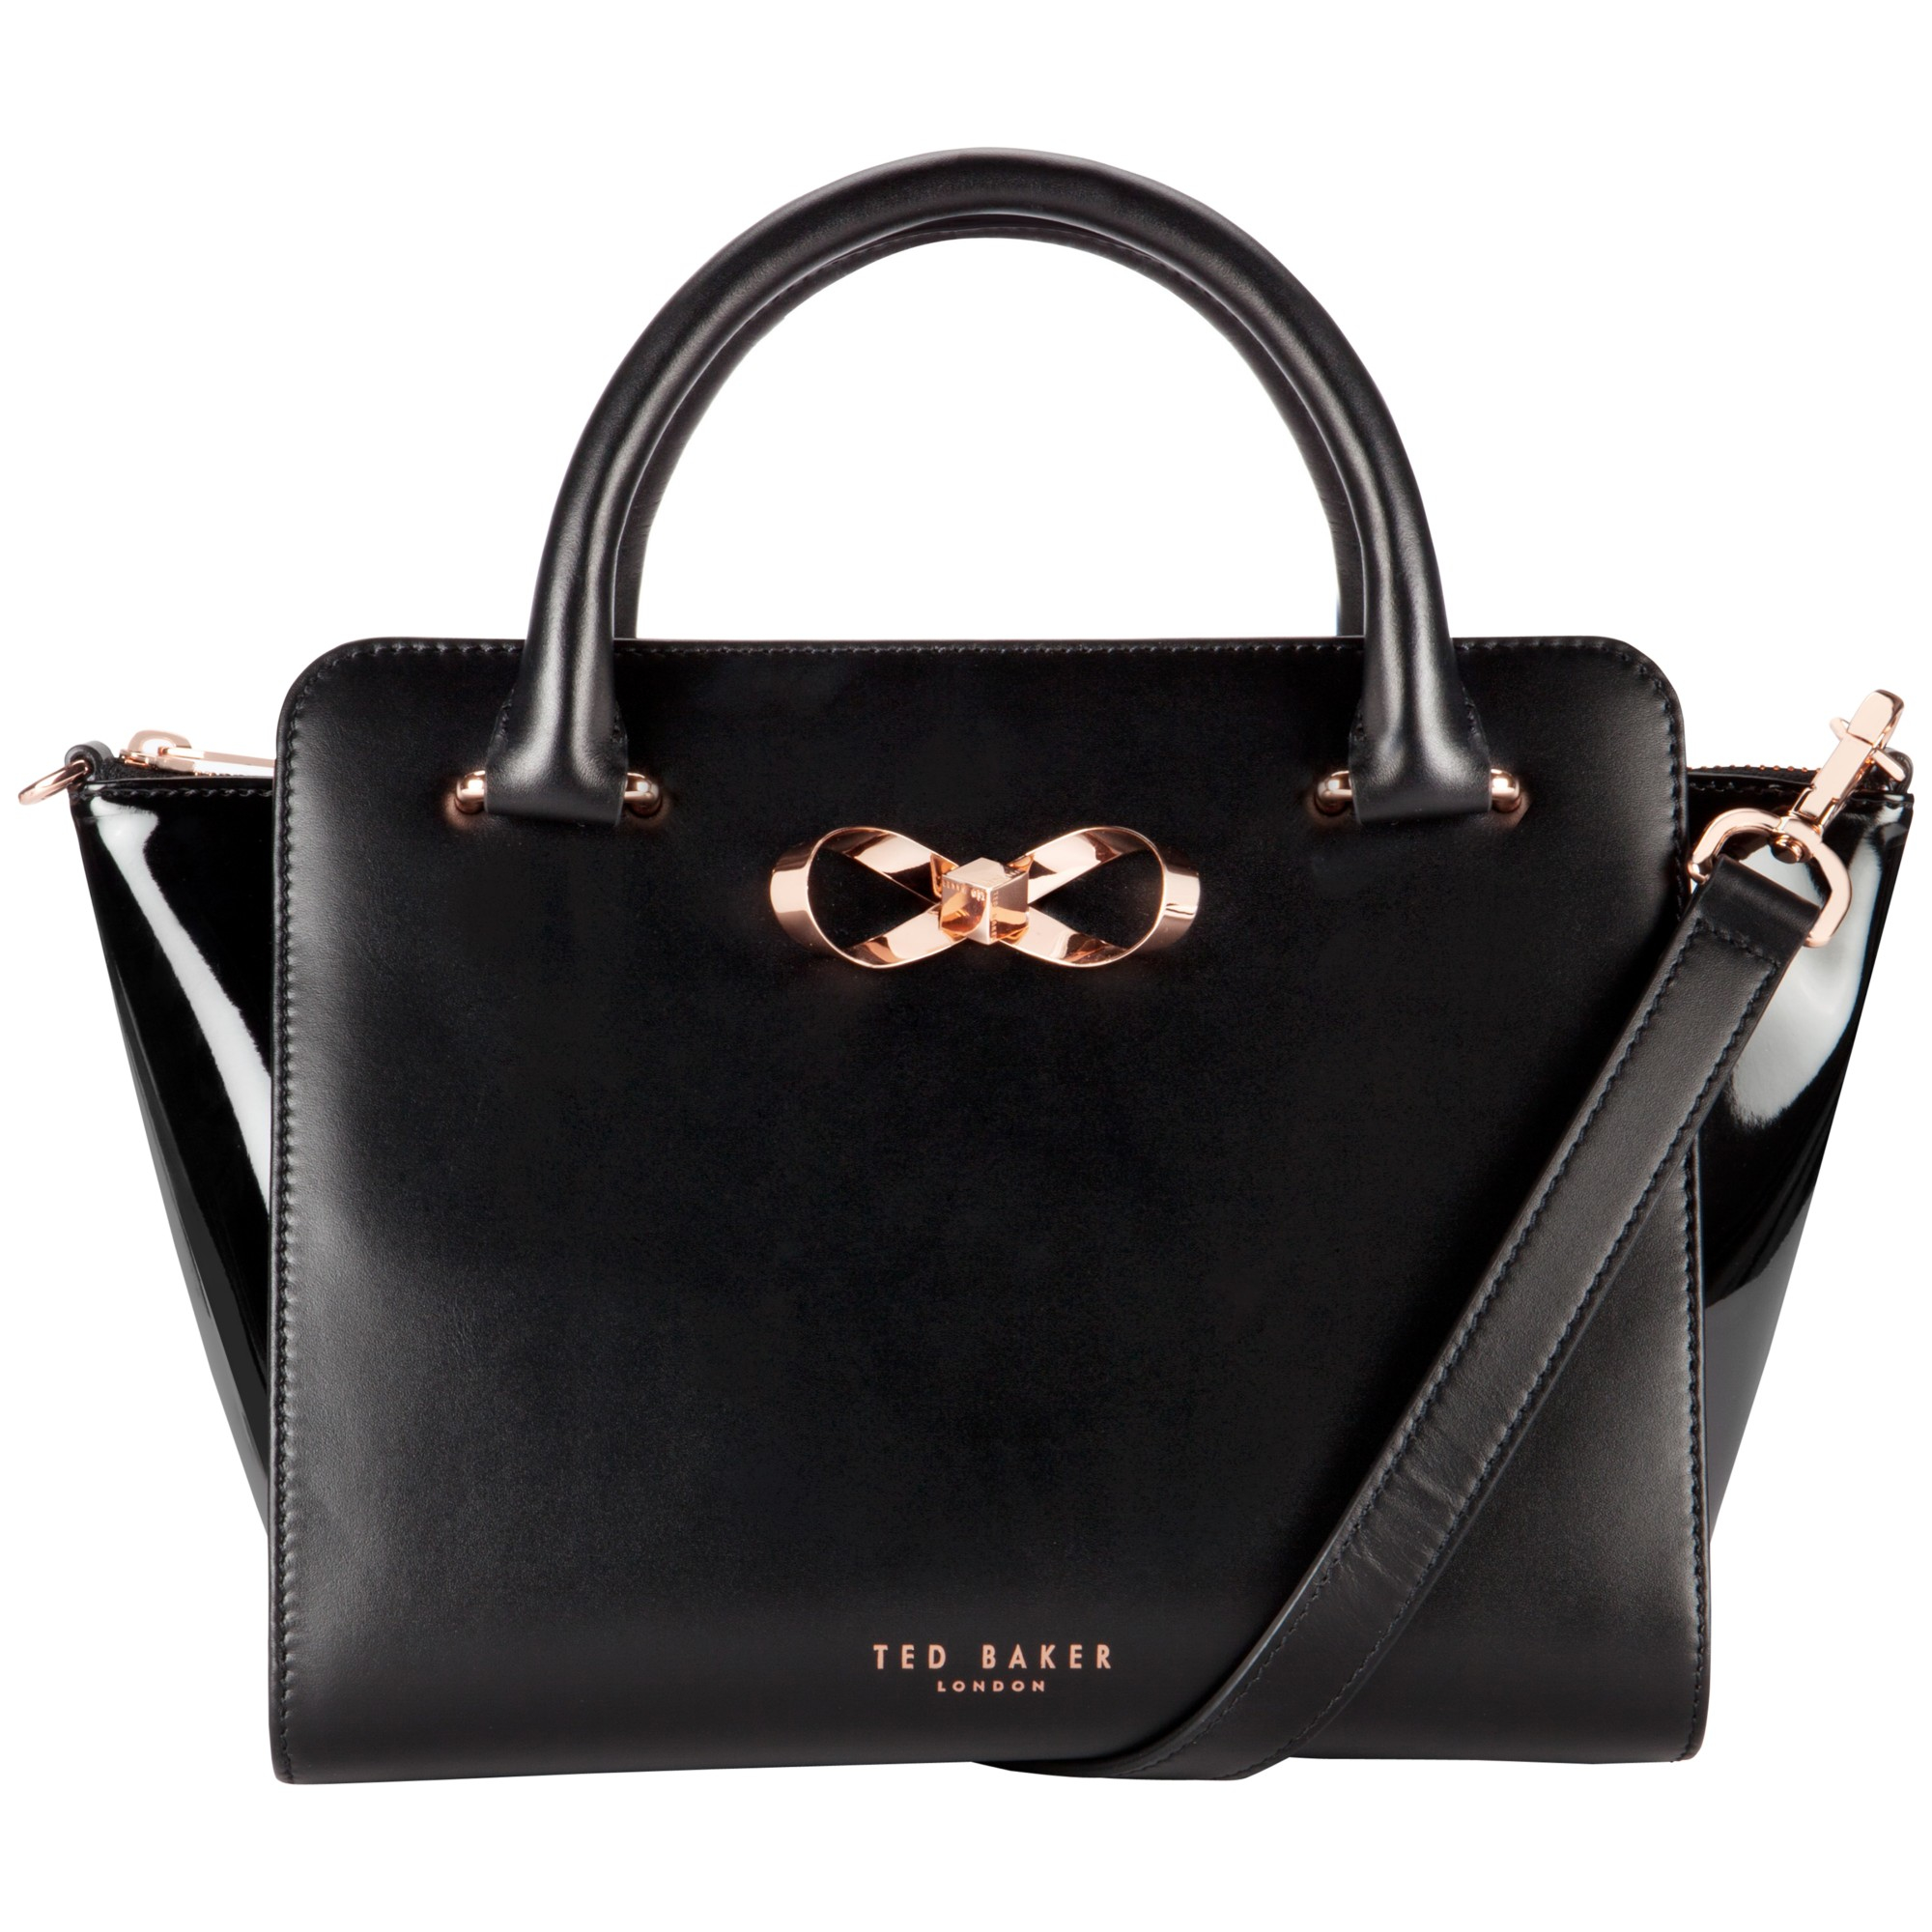 Ted Baker Paiton Bow Leather Tote Bag in Black - Lyst